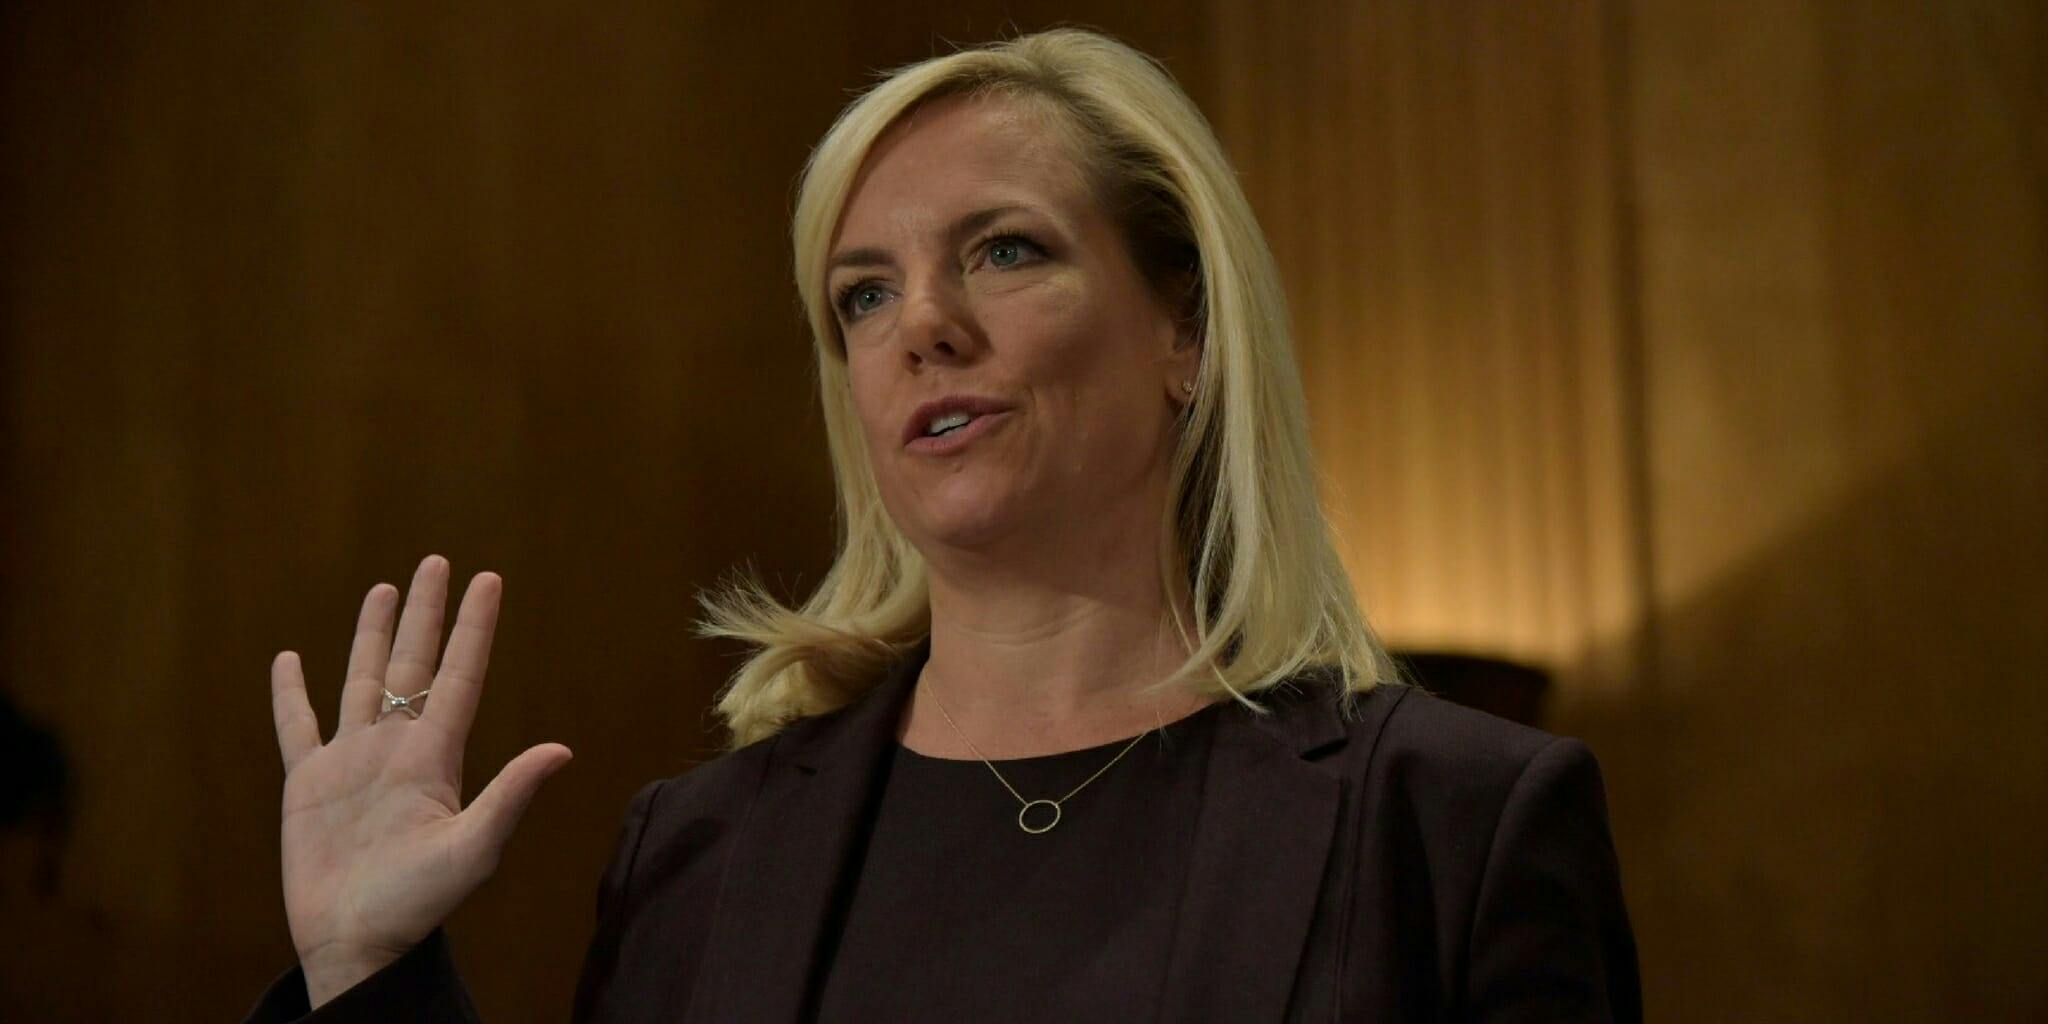 Kirstjen Nielsen is sworn in at a hearing on her nomination to become the Secretary of the Department of Homeland Security.